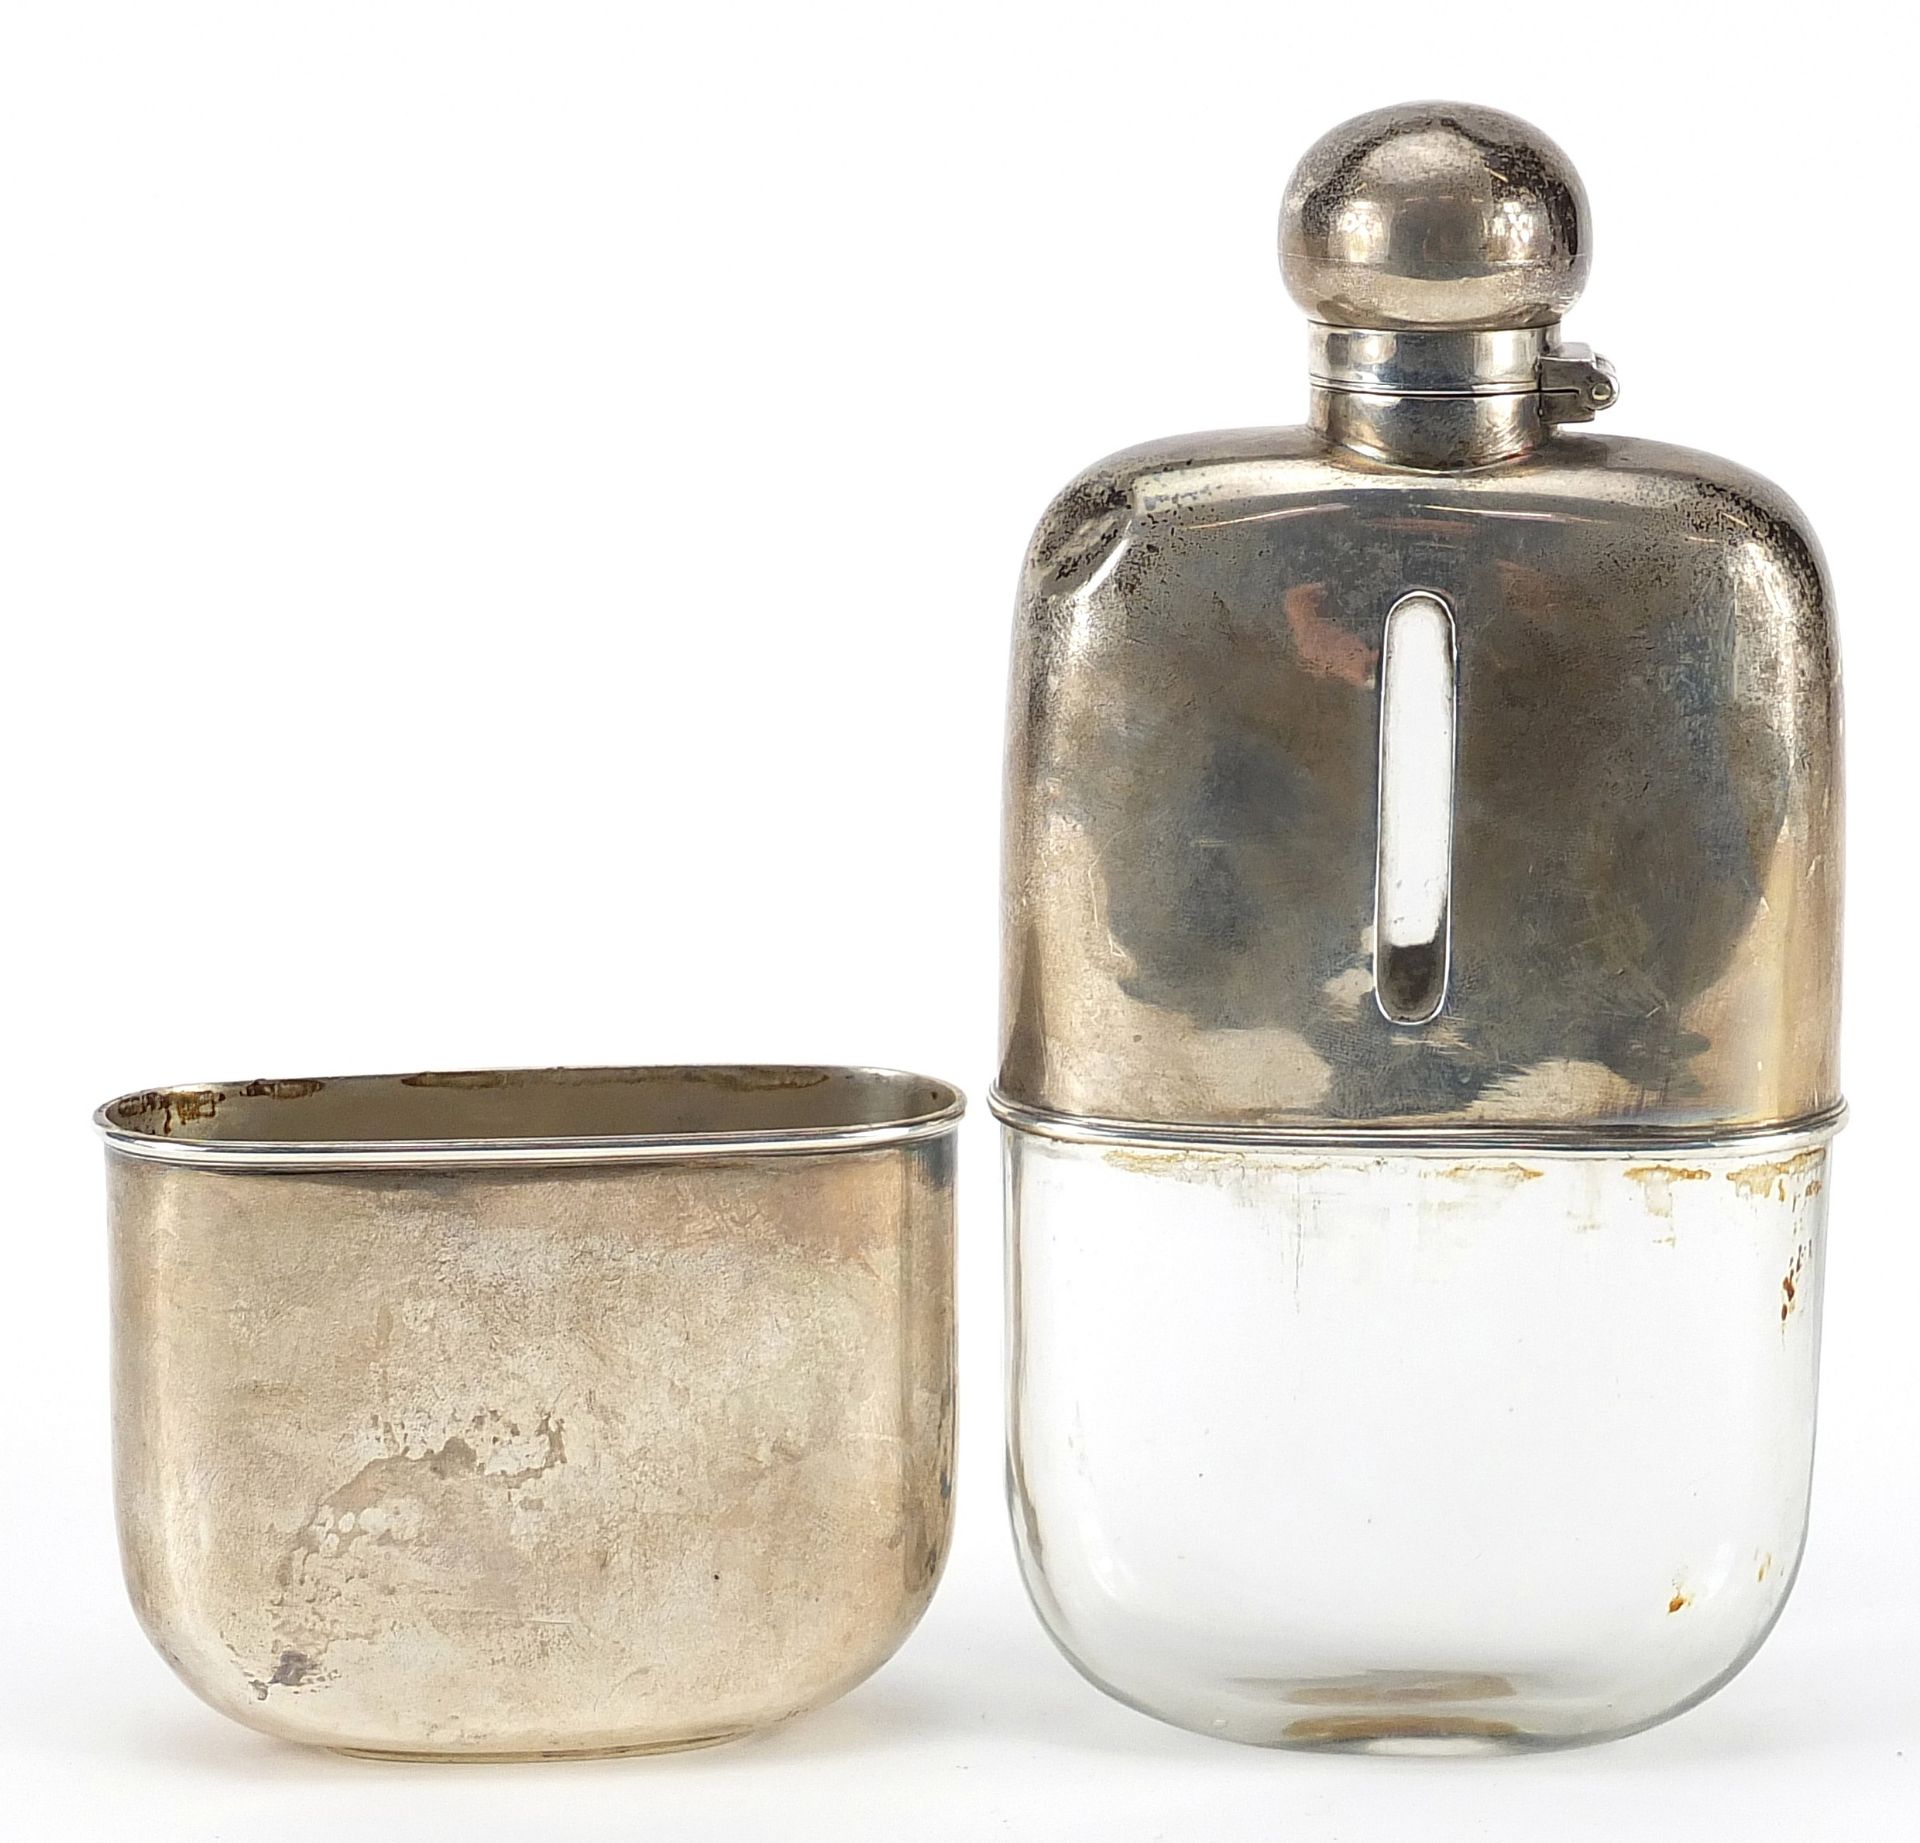 James Dixon & Sons Ltd, large Victorian silver and glass hip flask with detachable cup, Sheffield - Image 2 of 8